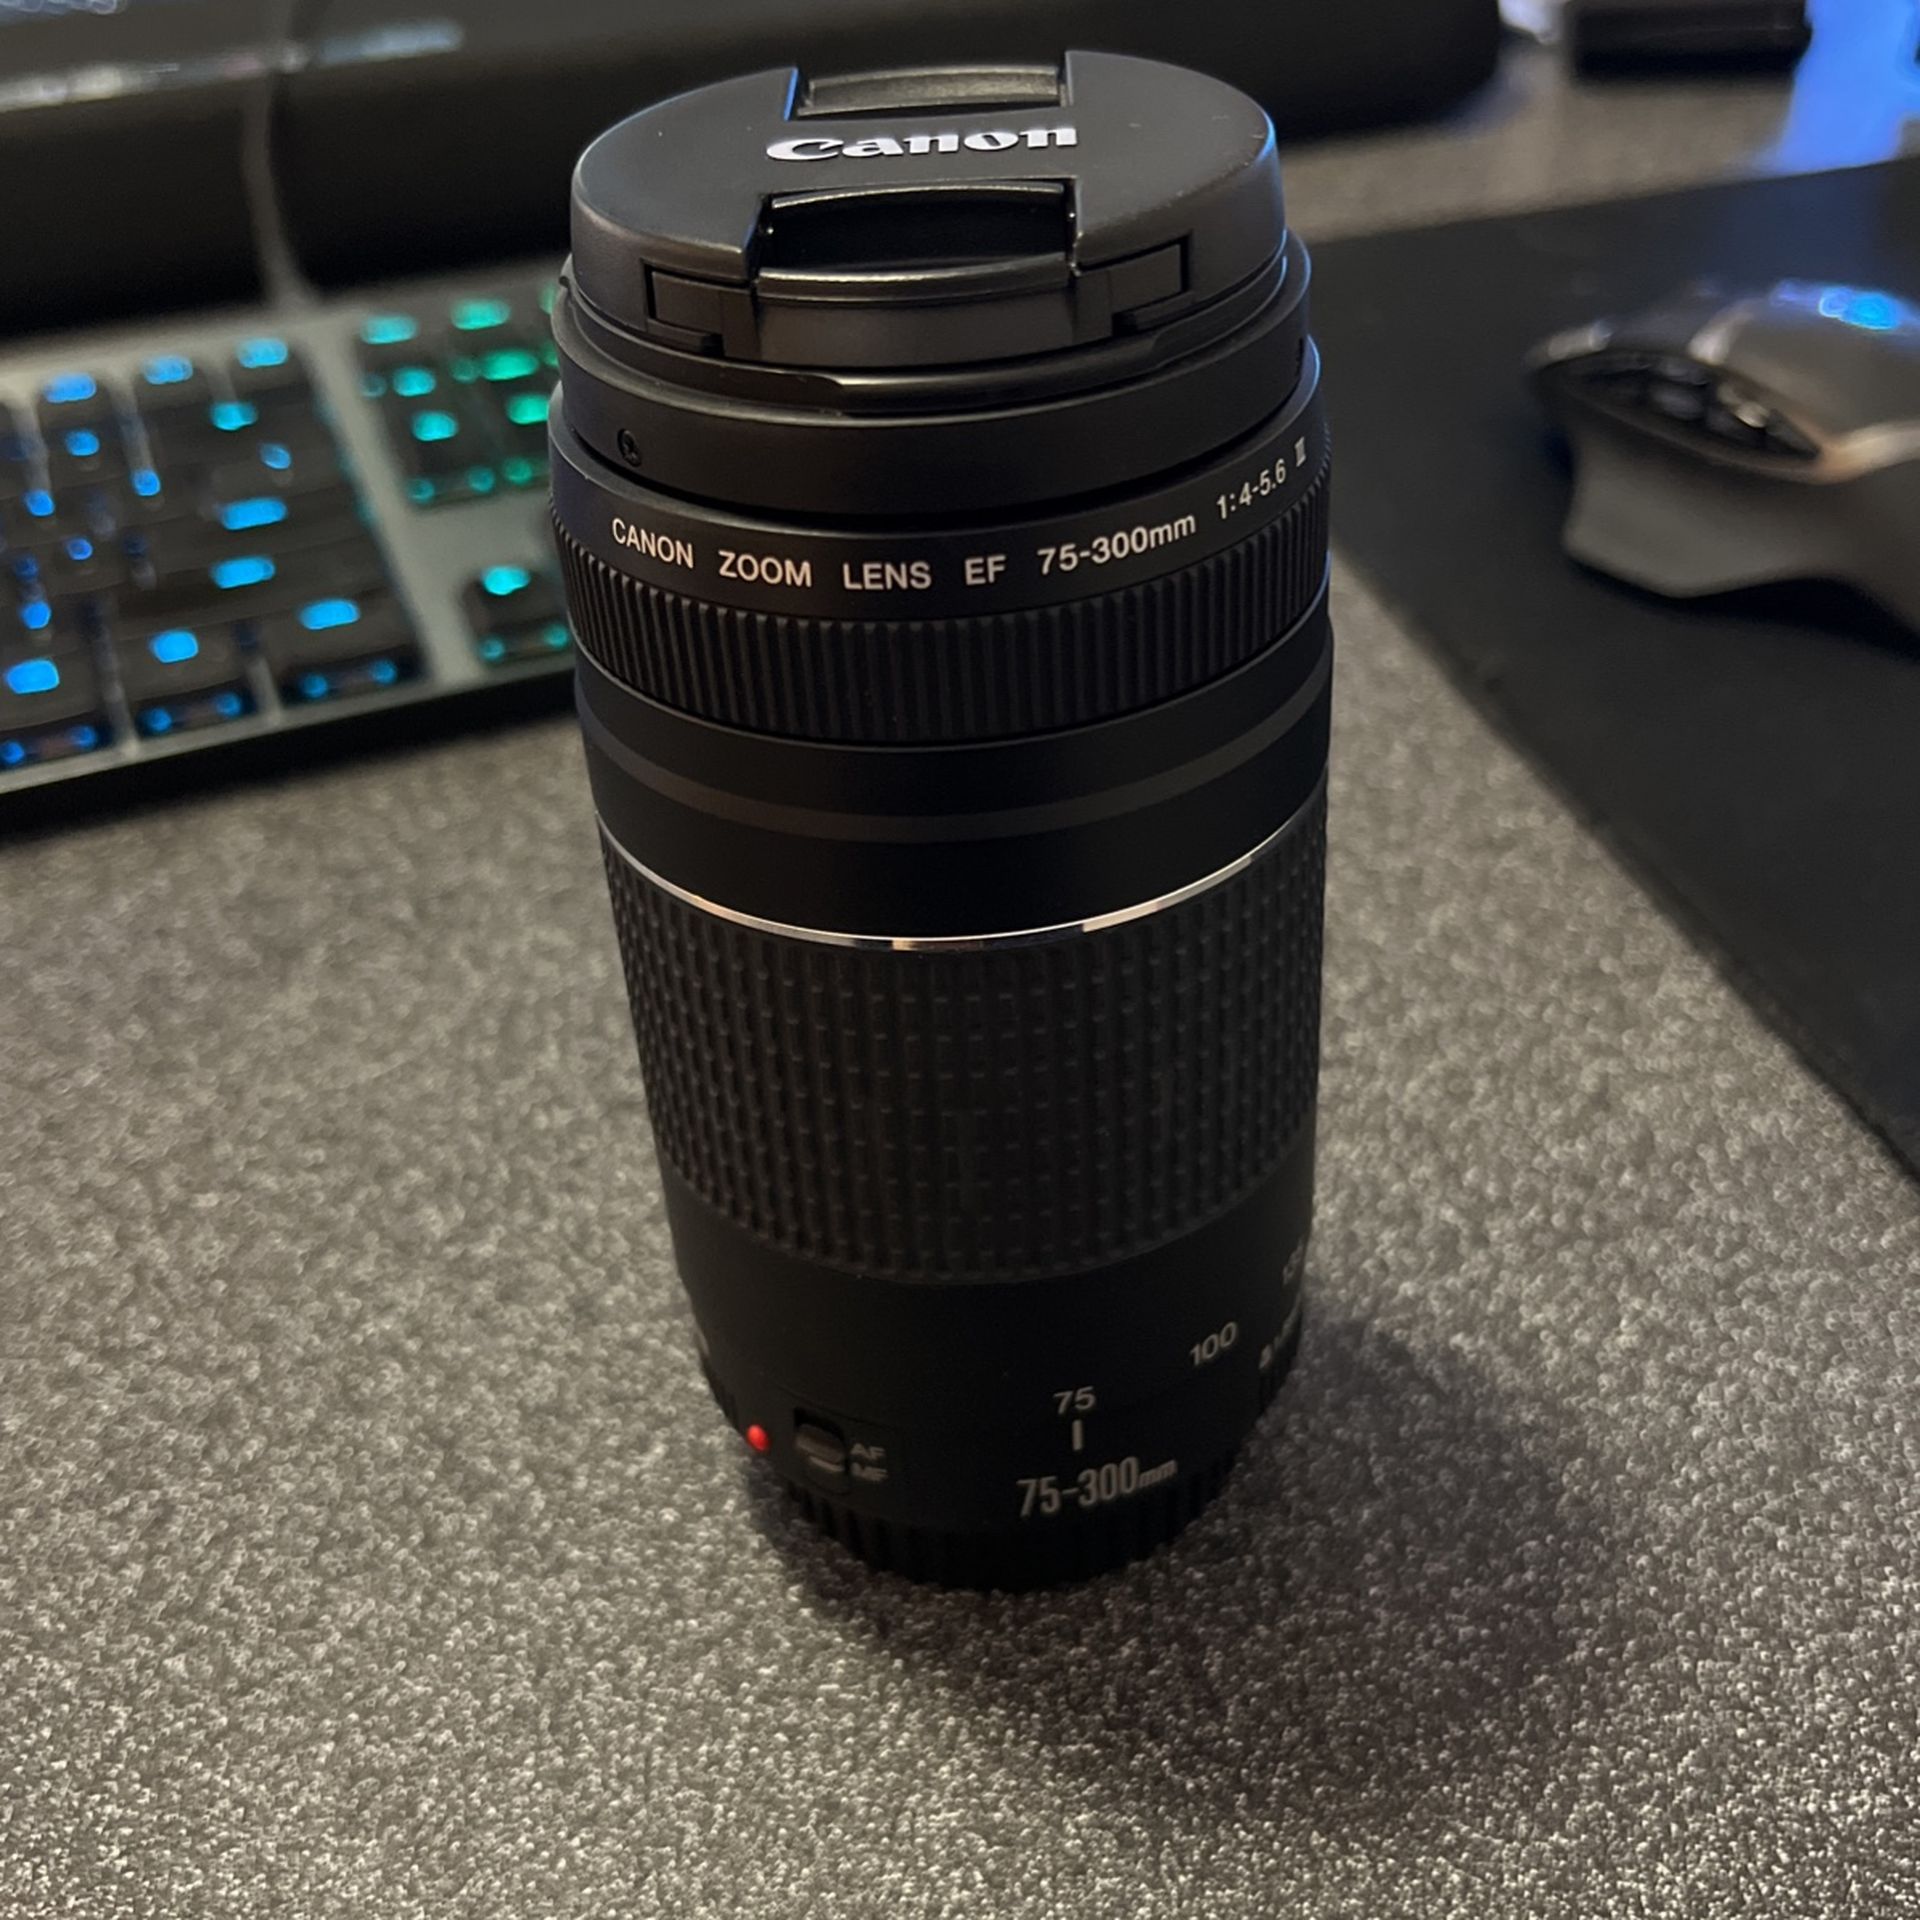 Canon Zoom Lens EF 75-300 